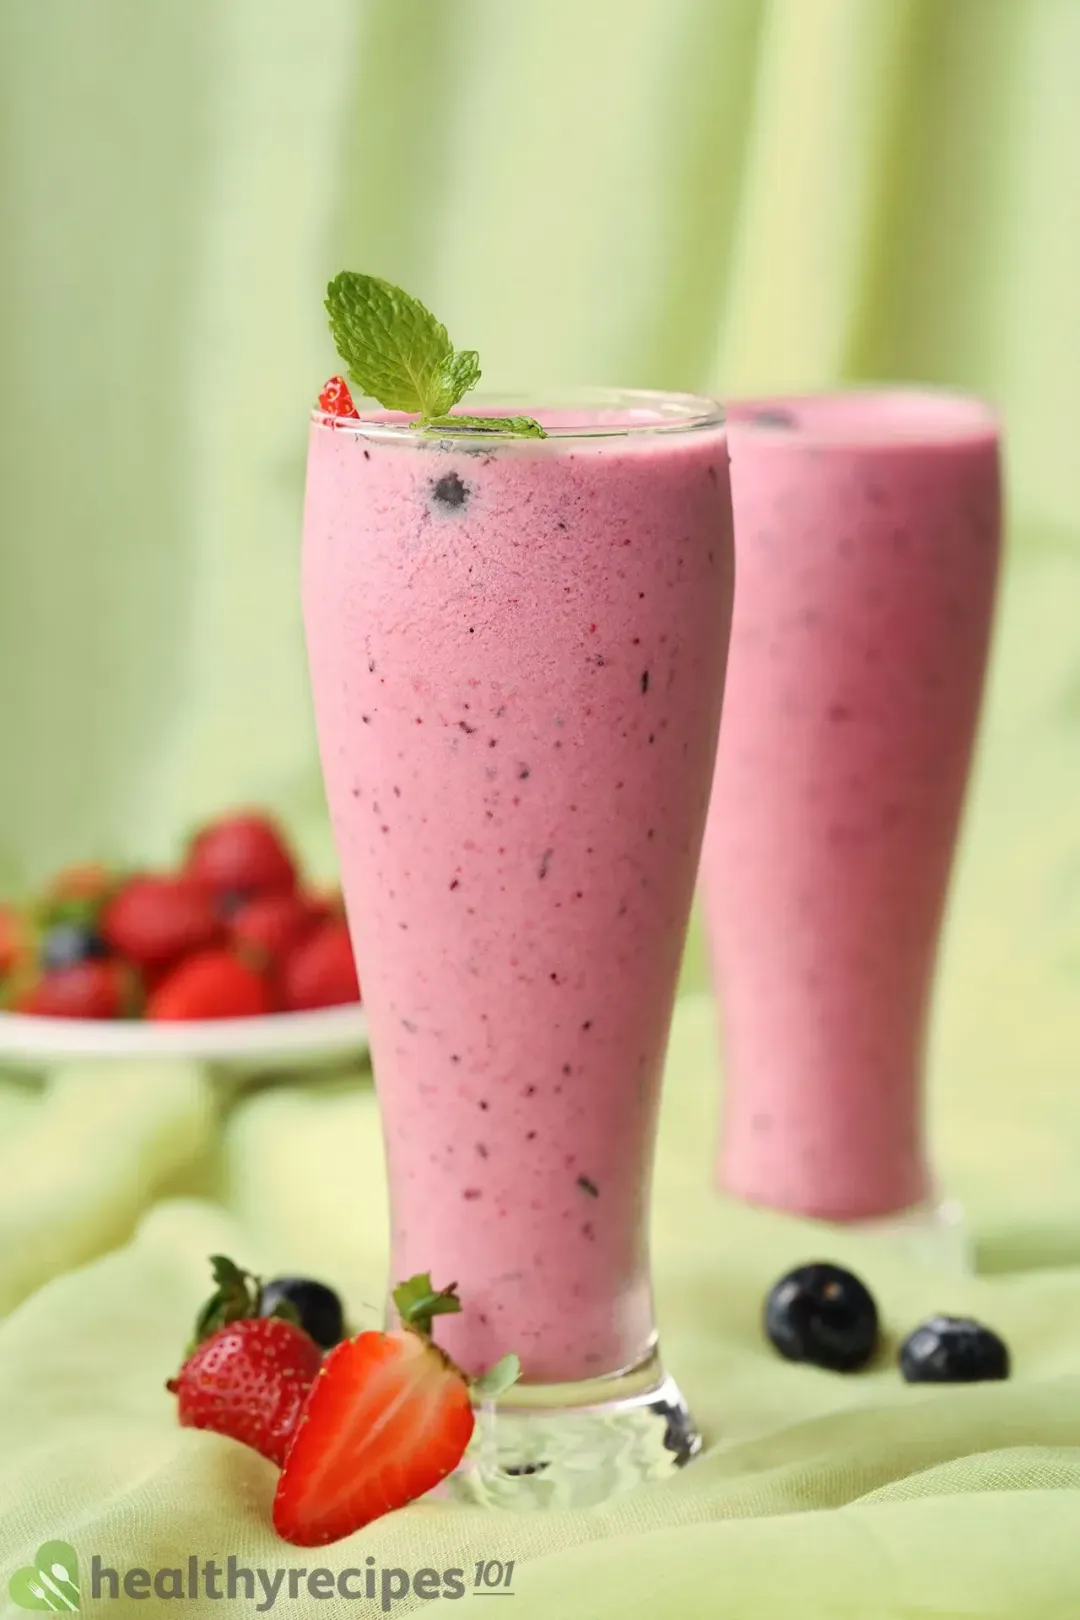 How Long Does Strawberry Blueberry Smoothie Last